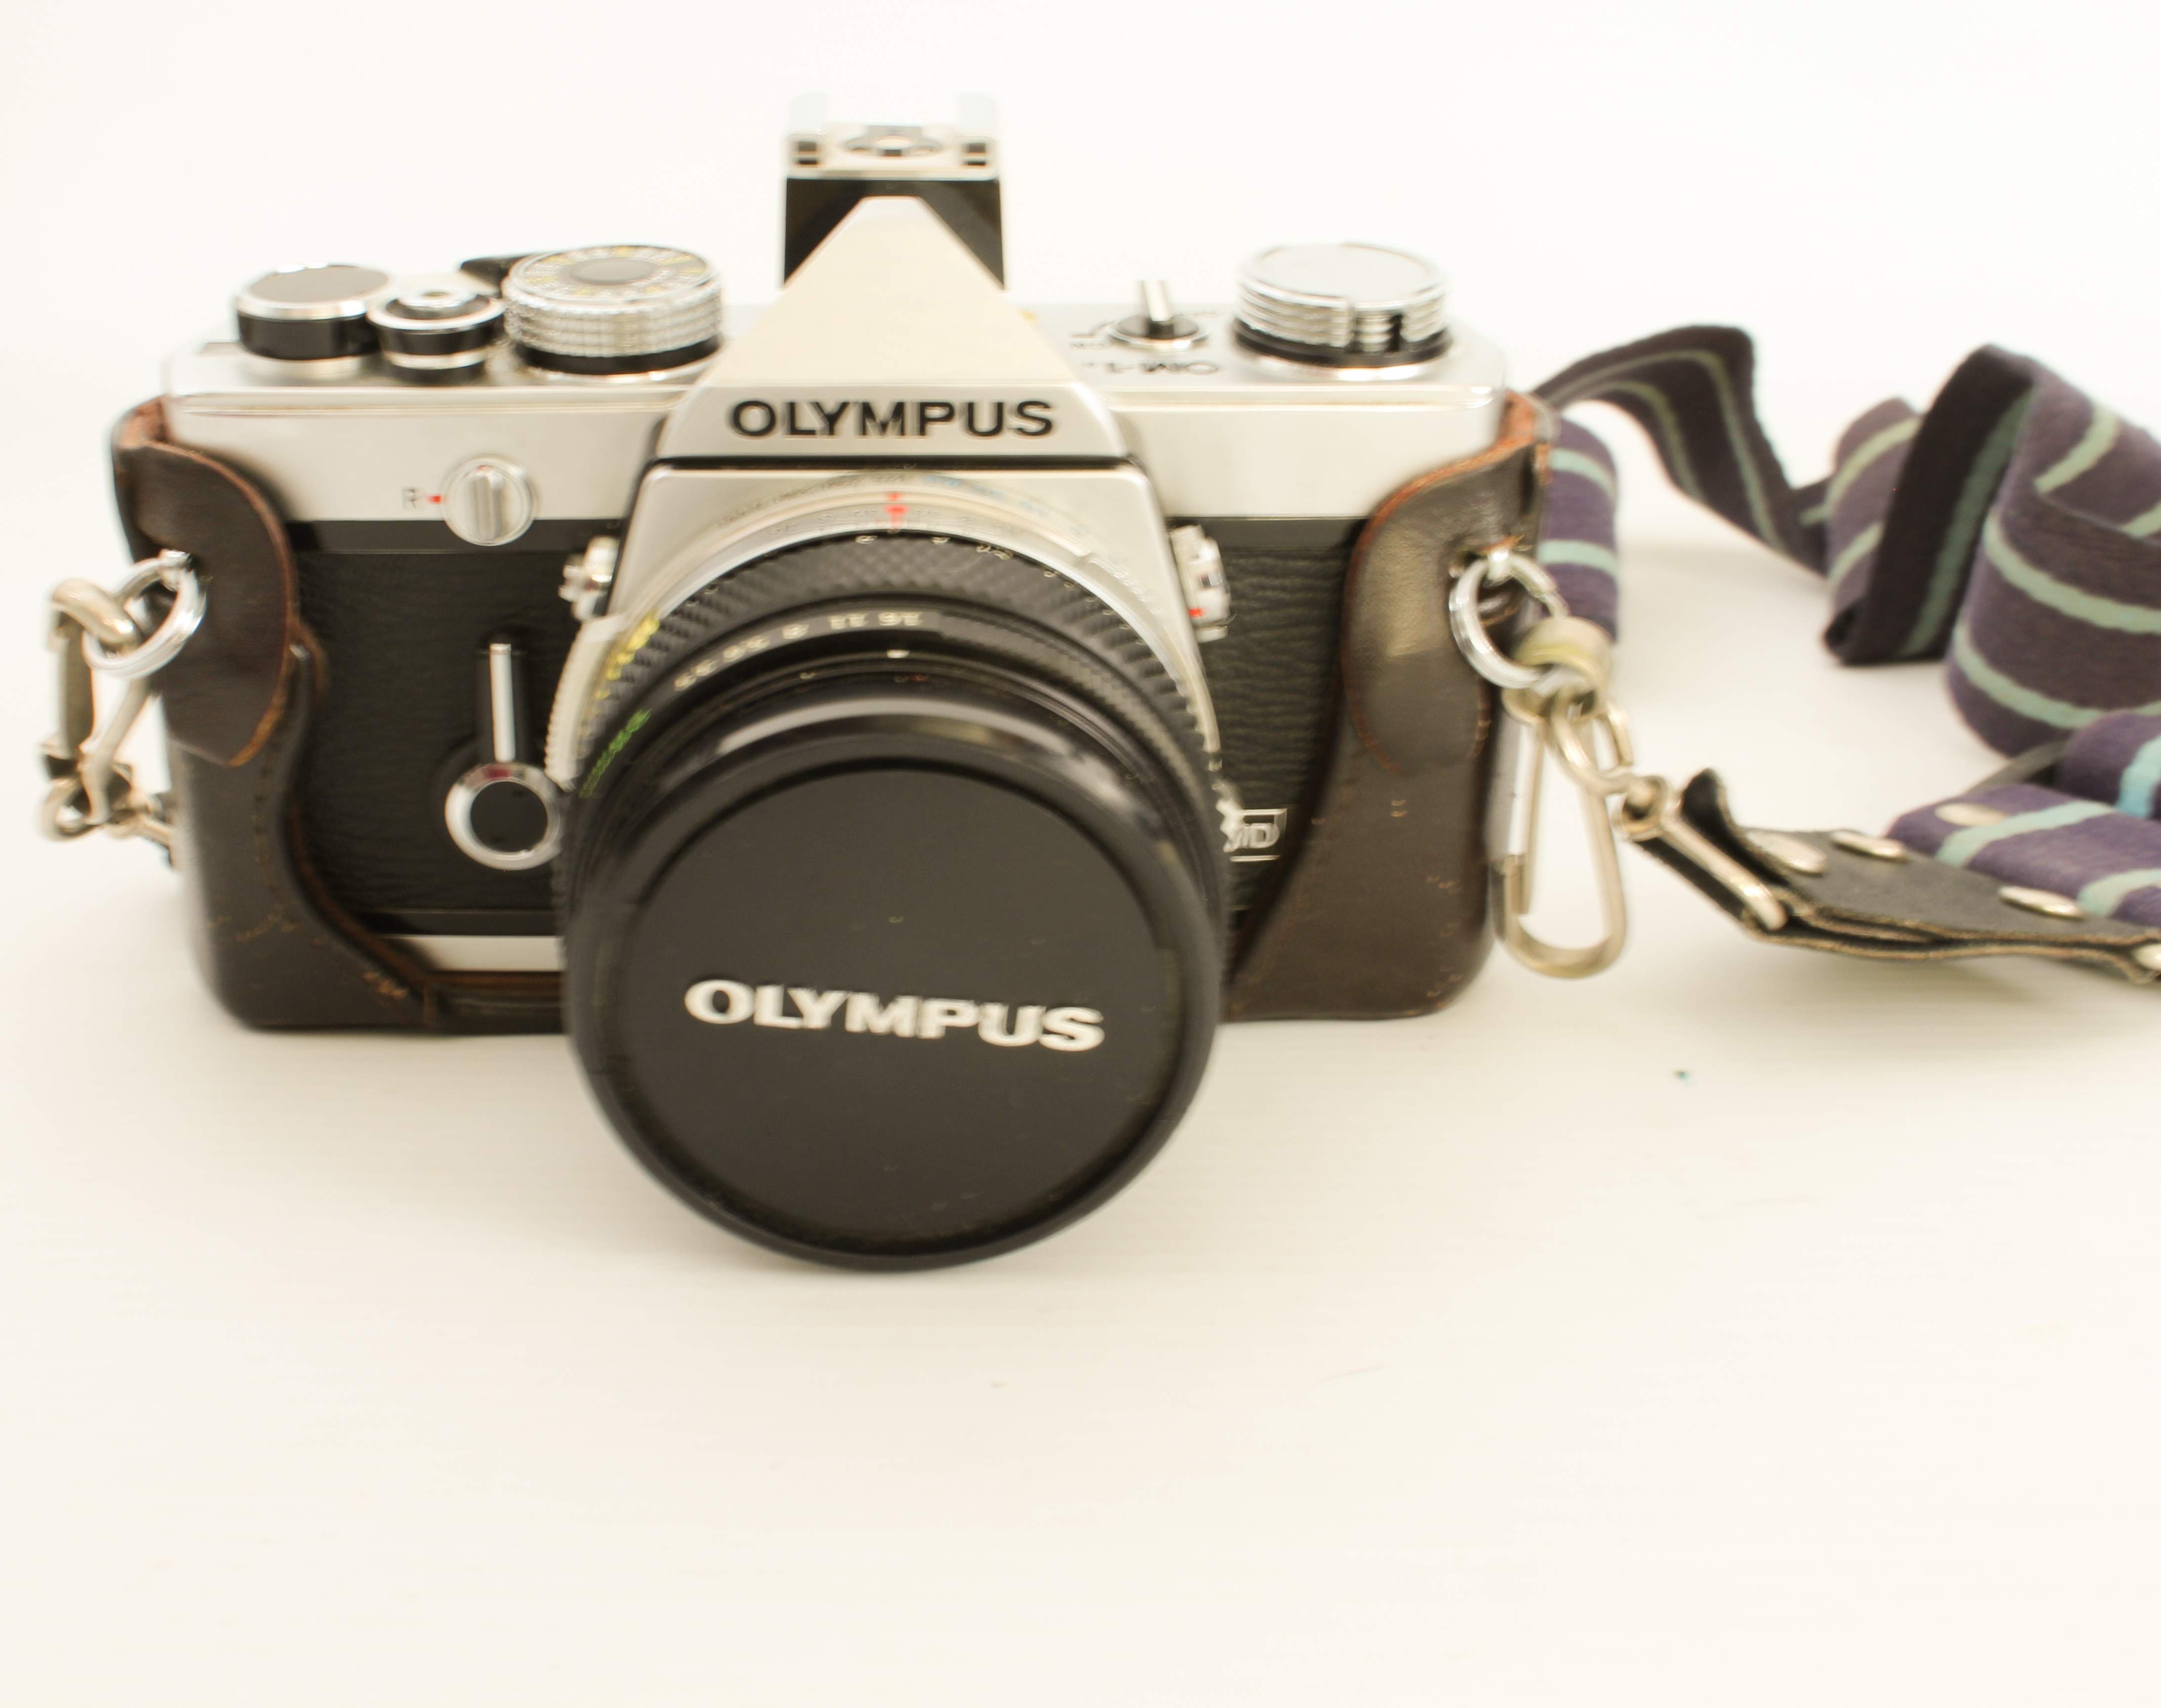 An Olympus OM-1 35mm camera, lenses and accessories - the OM-1N body with an Olympus OM-System G. - Image 2 of 4